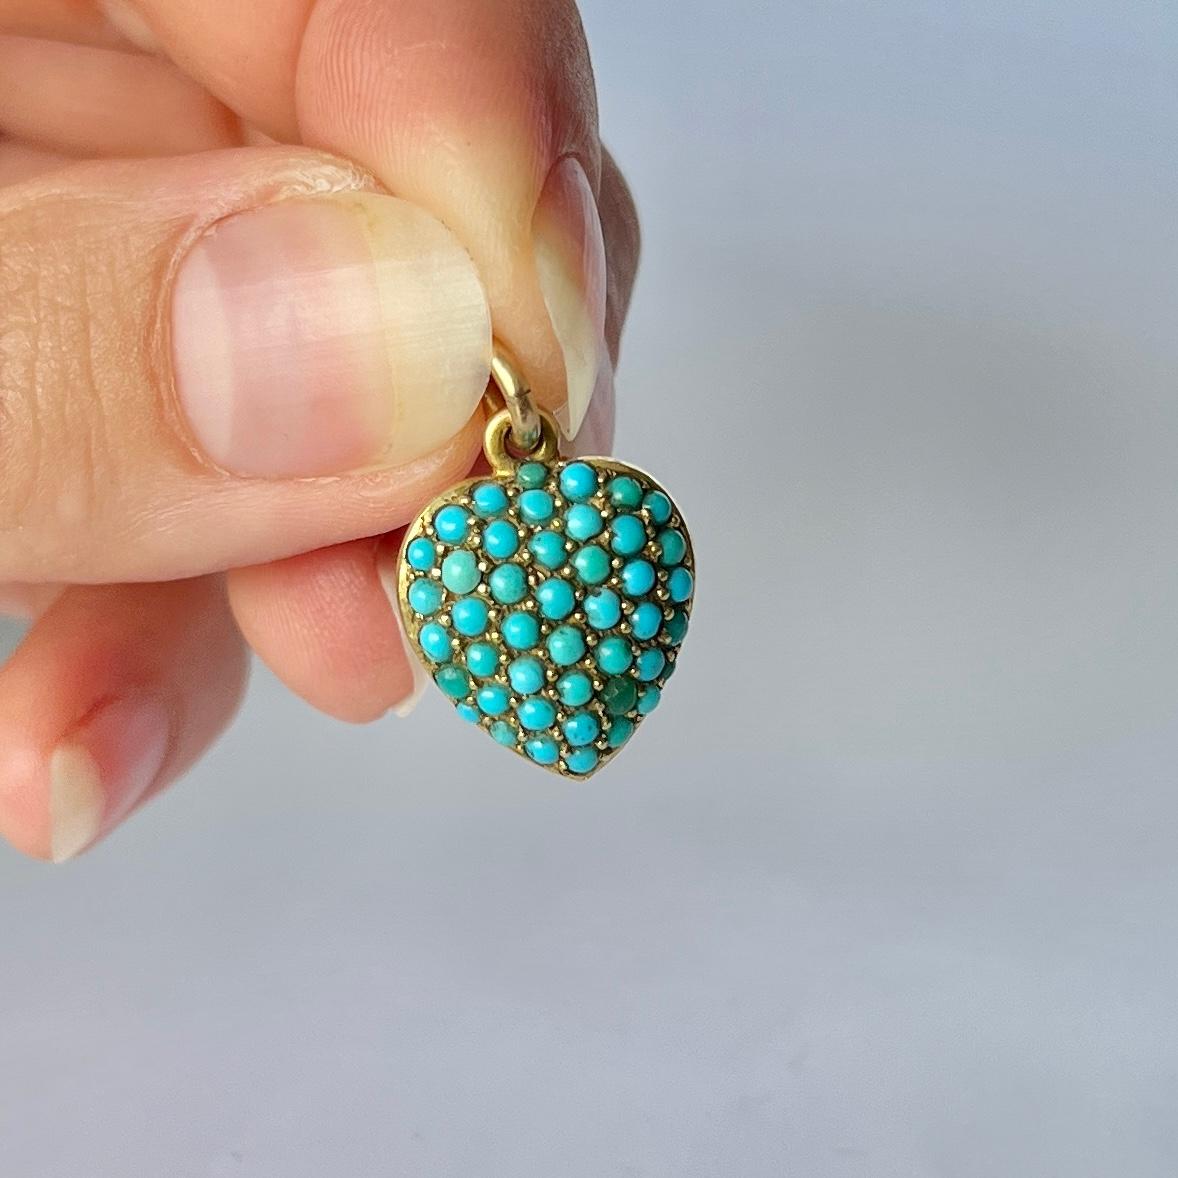 This gorgeous heart locket is covered with turquoise and when you turn over to the back there is a locket panel holding a lock of hair. Modelled in 15ct gold. 

Dimensions: 15x13mm

Weight: 3.1g